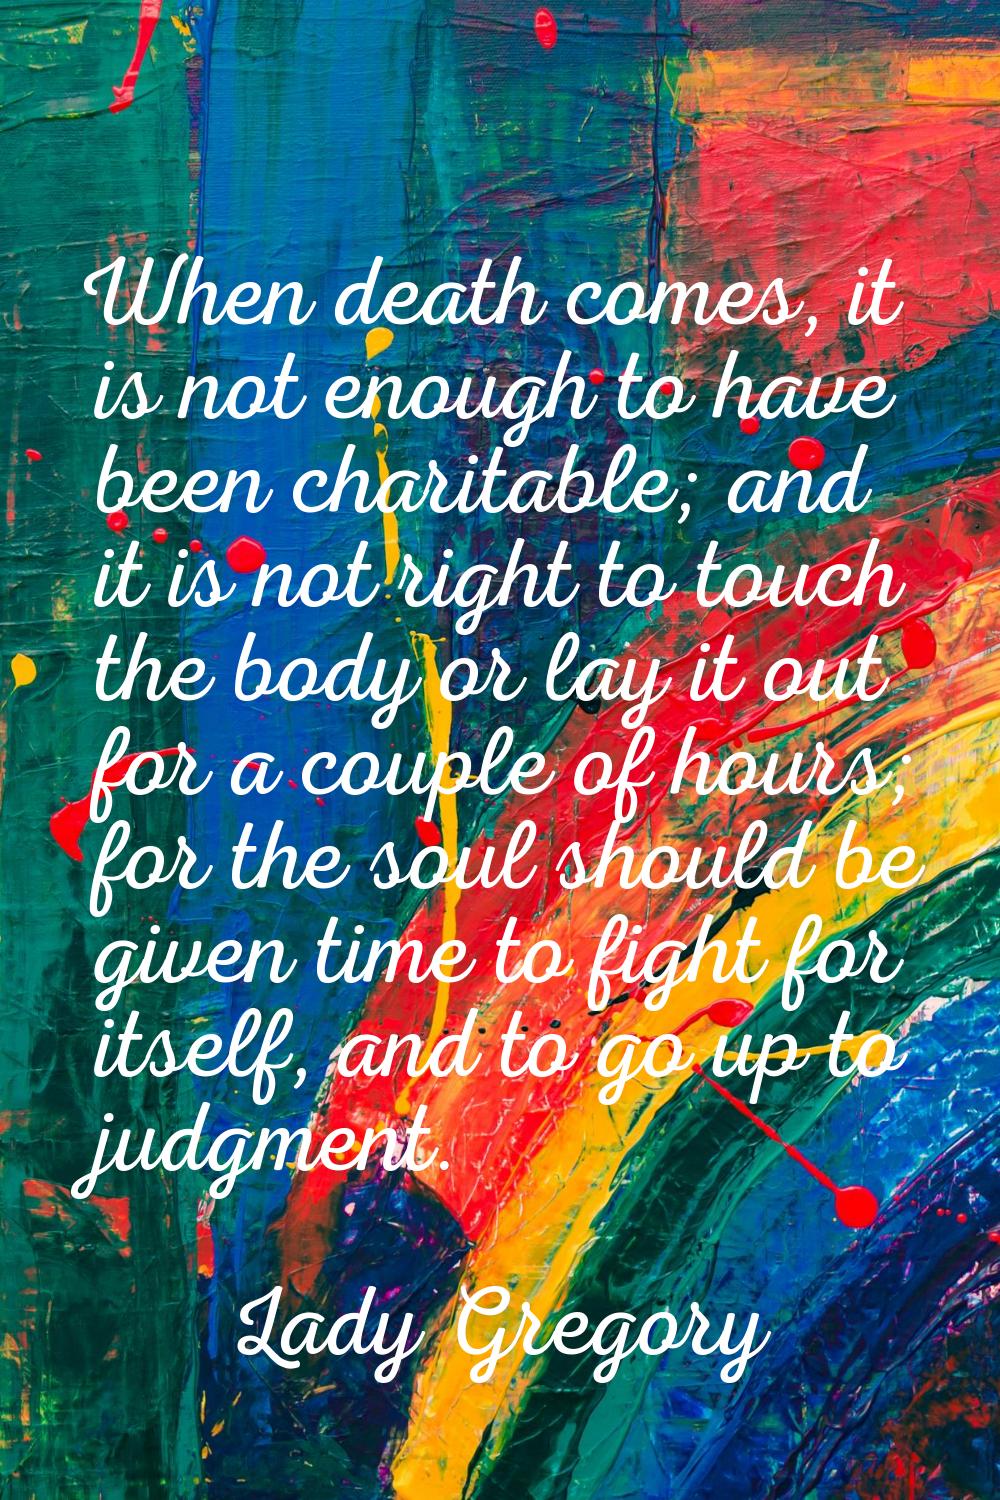 When death comes, it is not enough to have been charitable; and it is not right to touch the body o